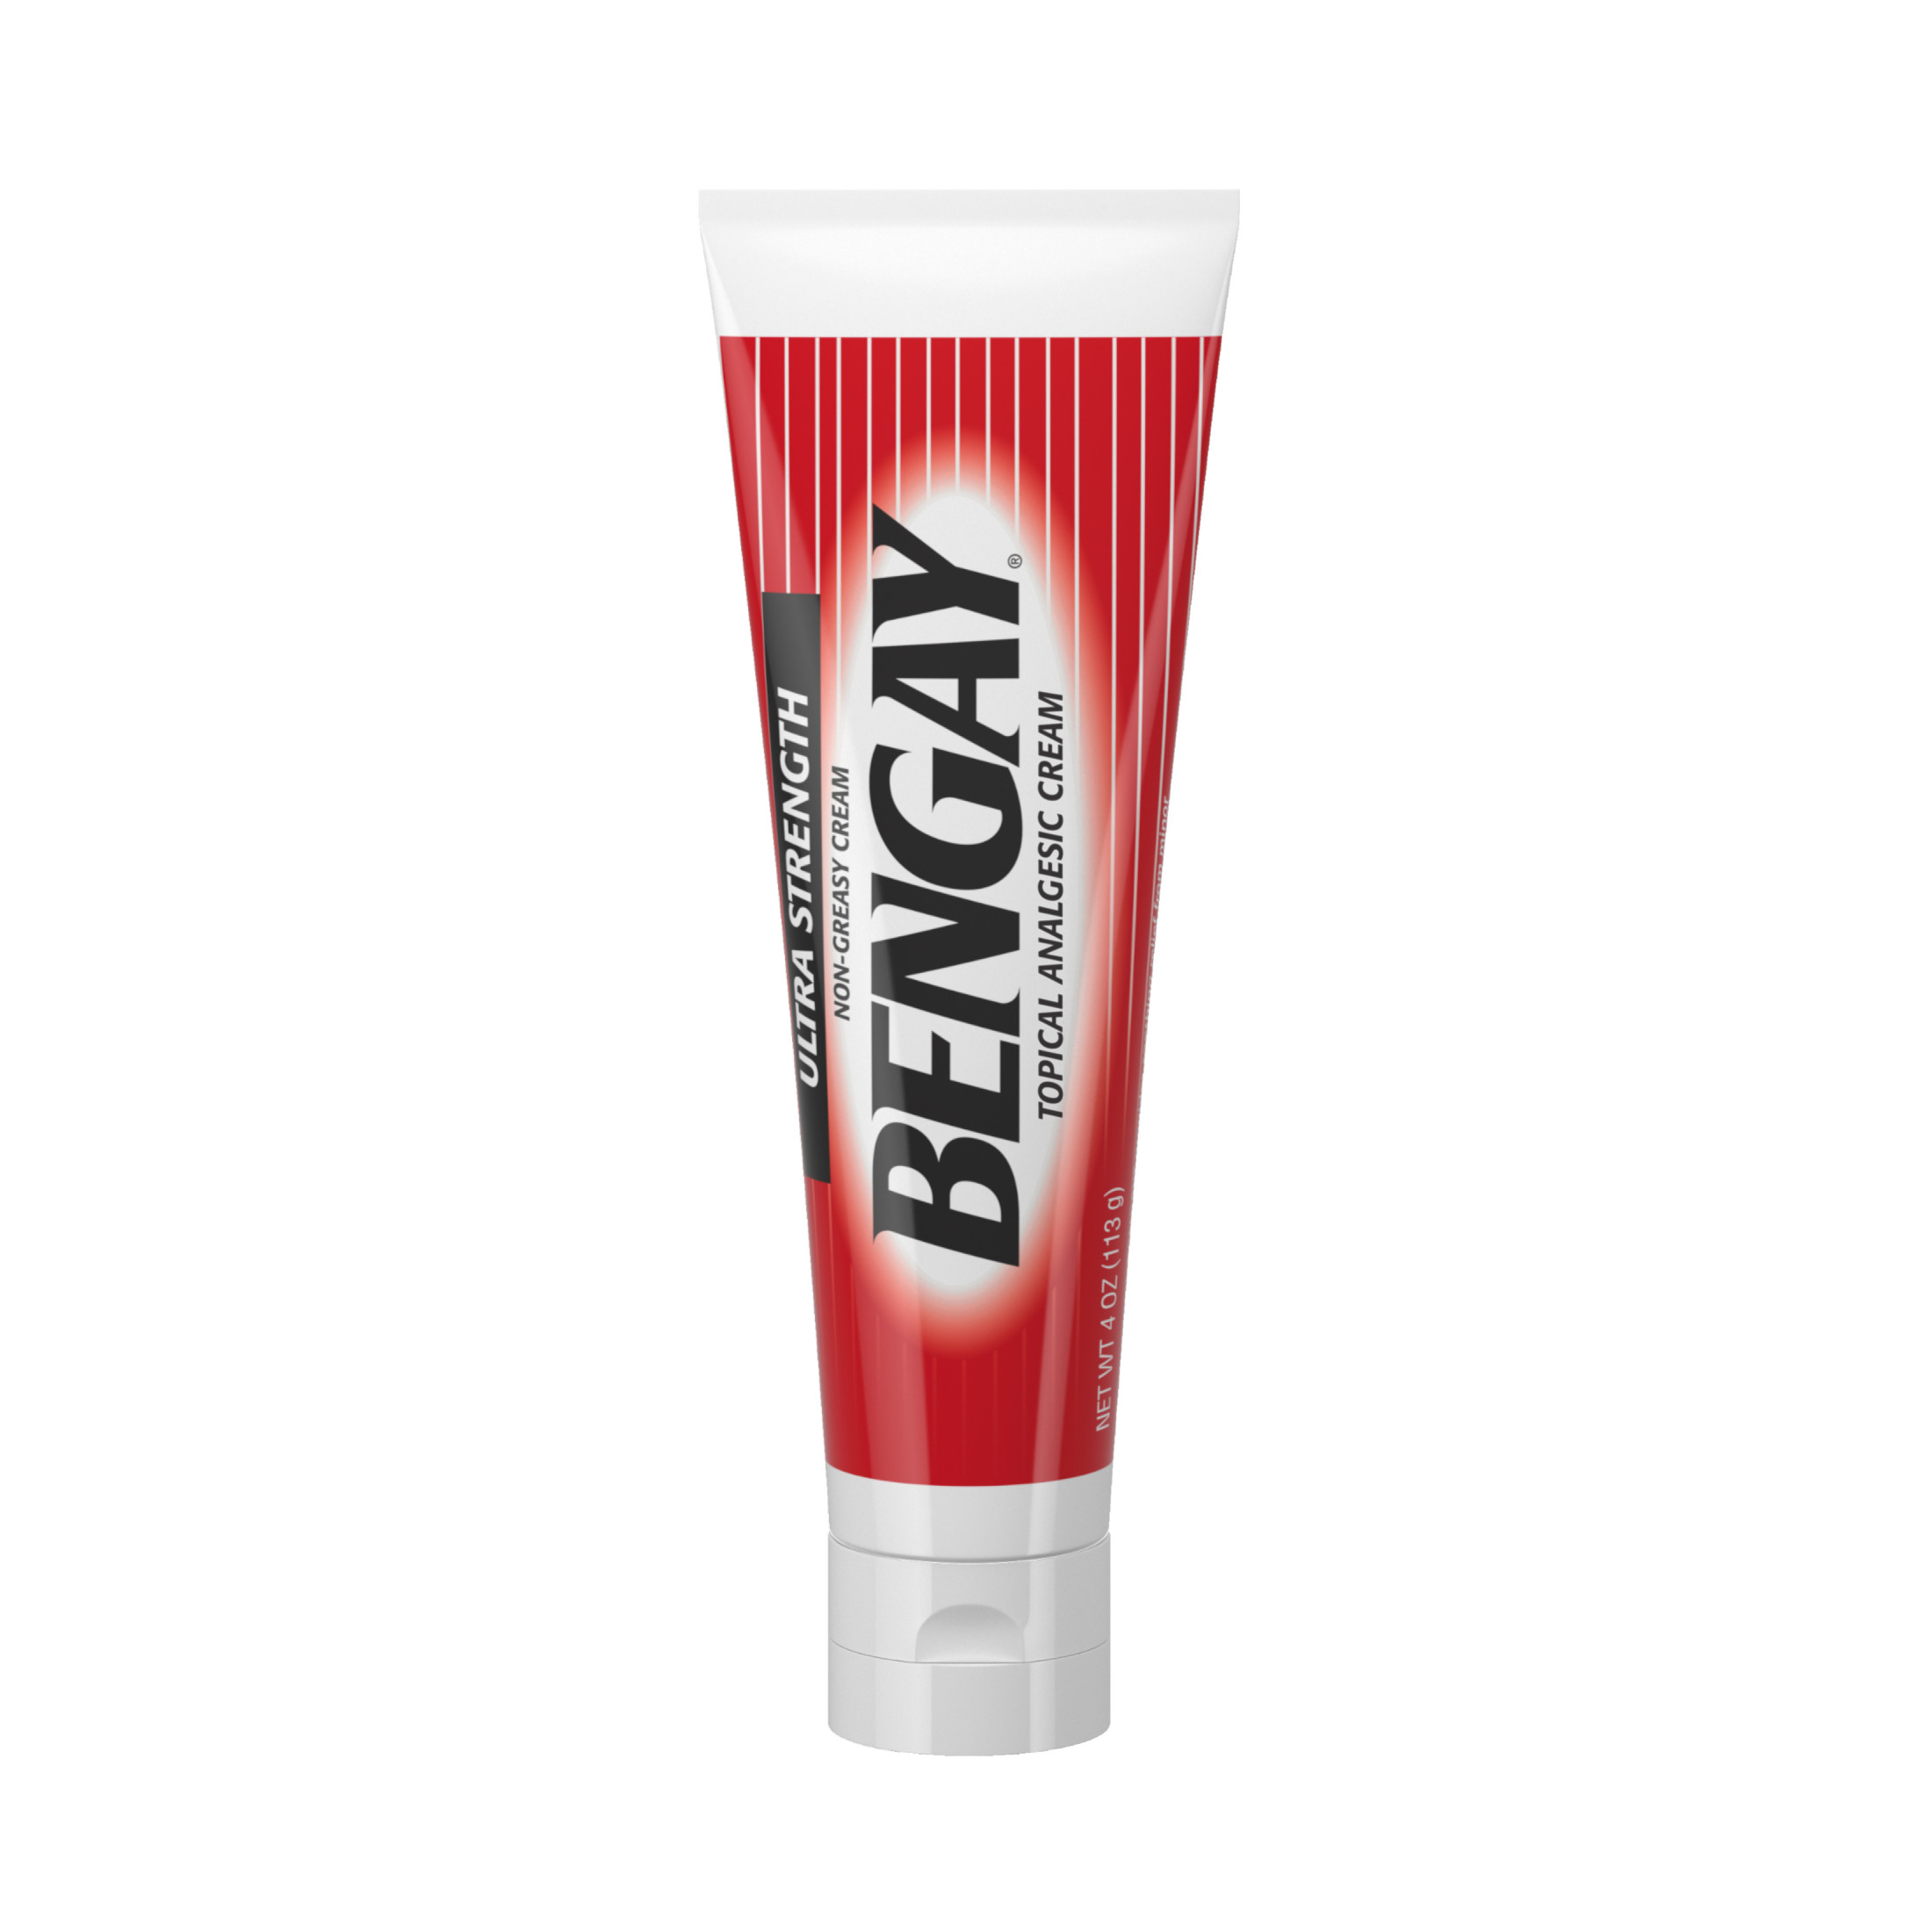 Ultra Strength Bengay Non-Greasy Topical Pain Relief Cream, 4 oz - image 1 of 15